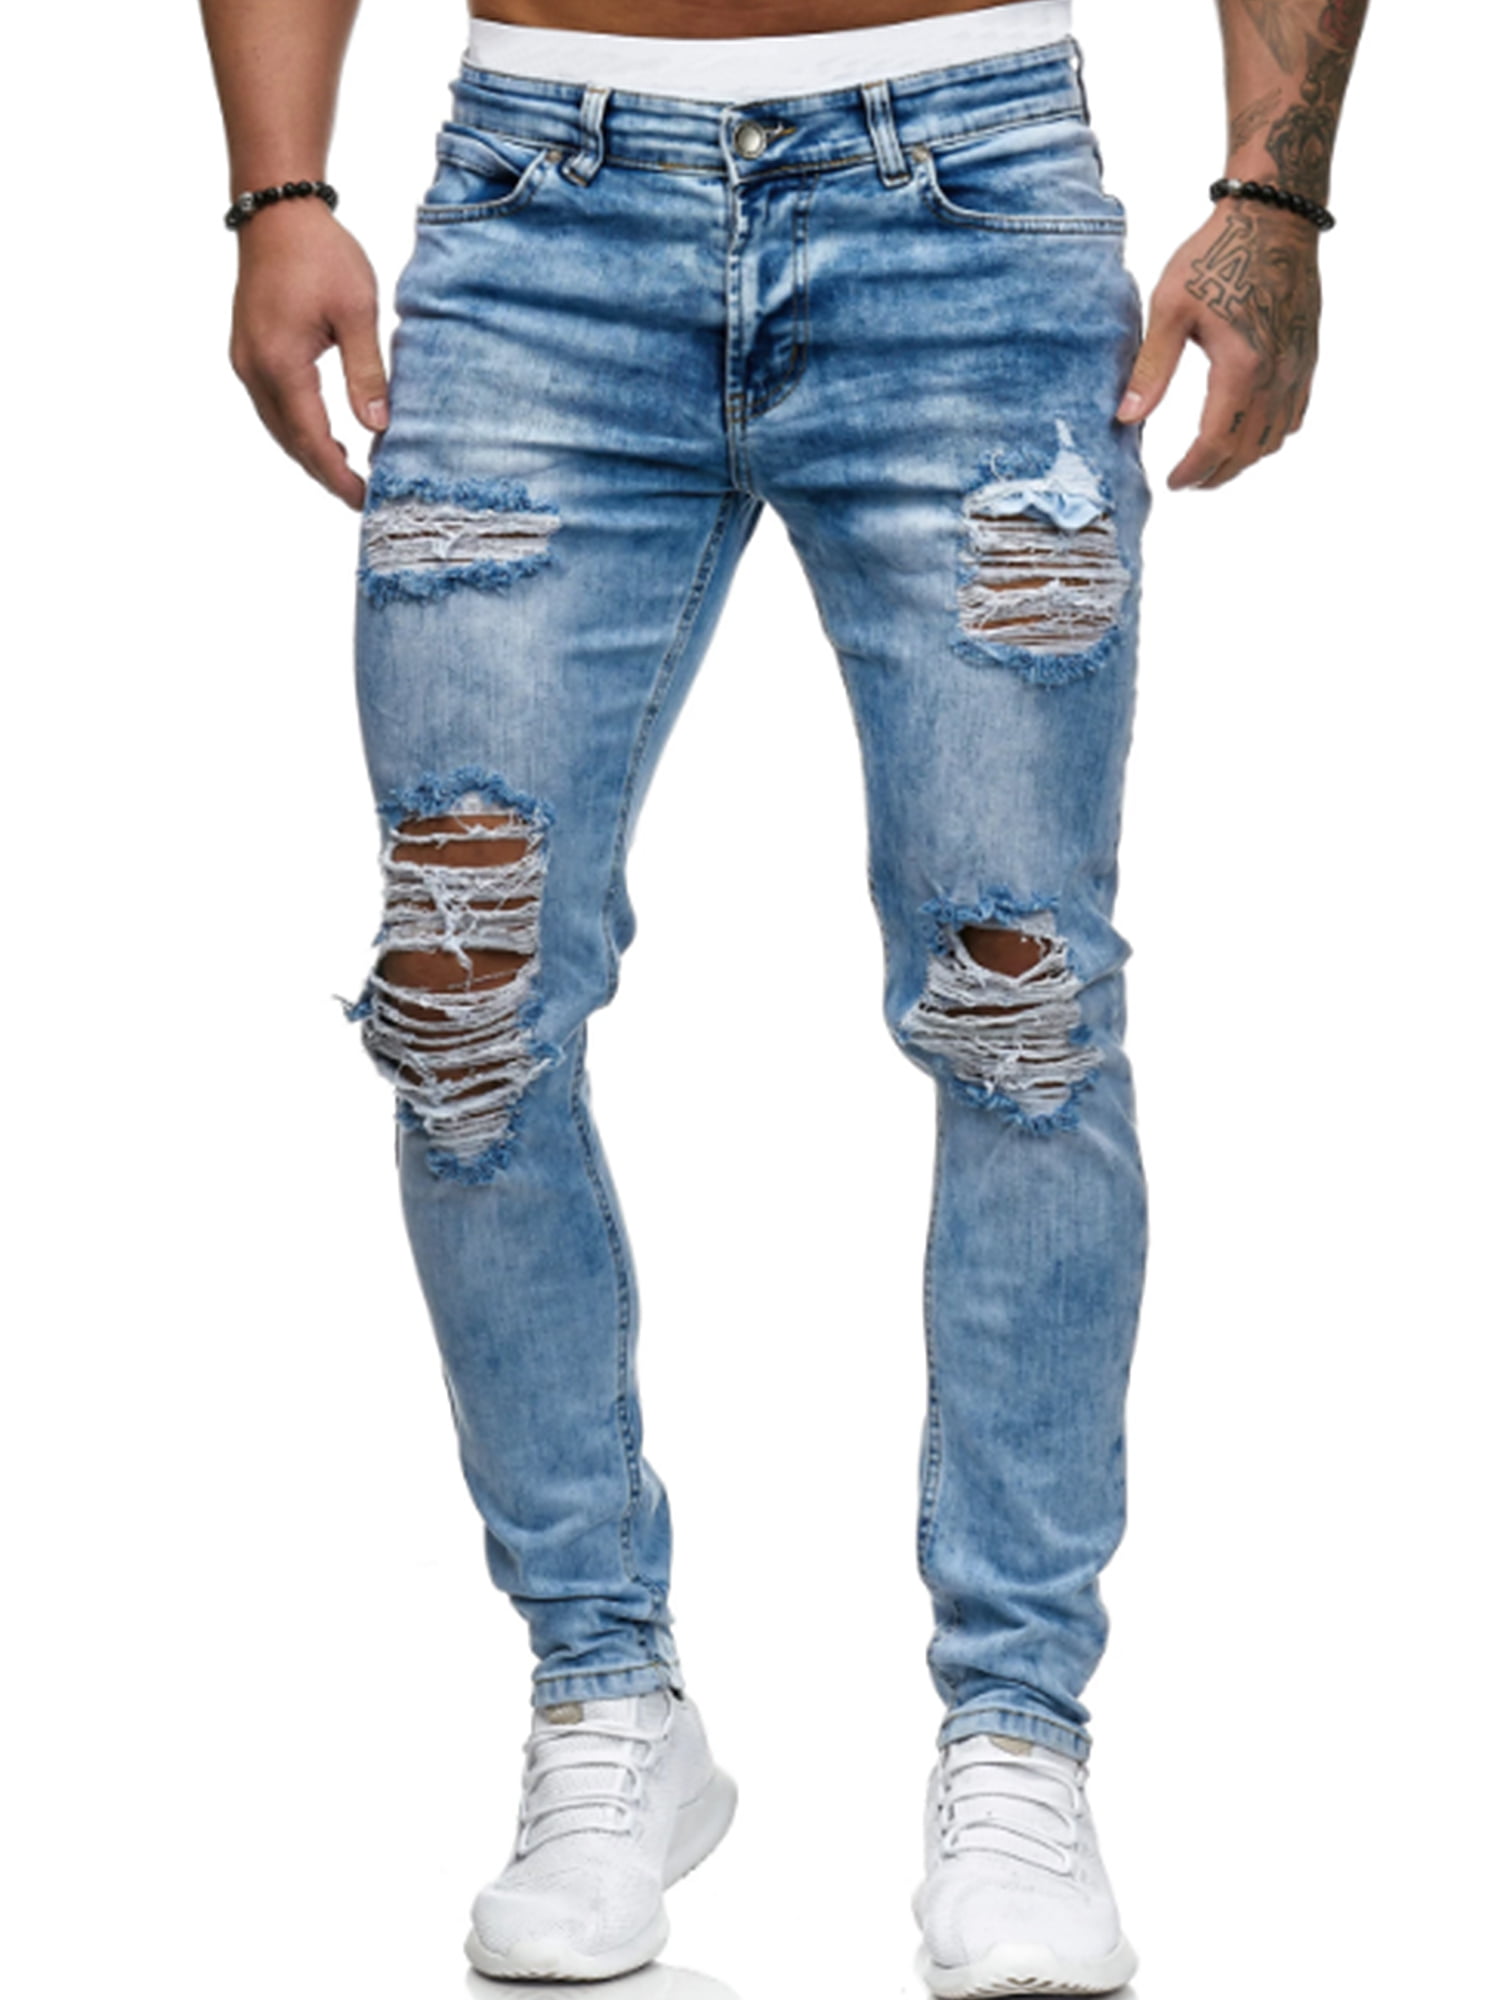 Fashion Men Stretch Ripped Jeans Trousers Slim Cool Hole Distressed Denim Pants 